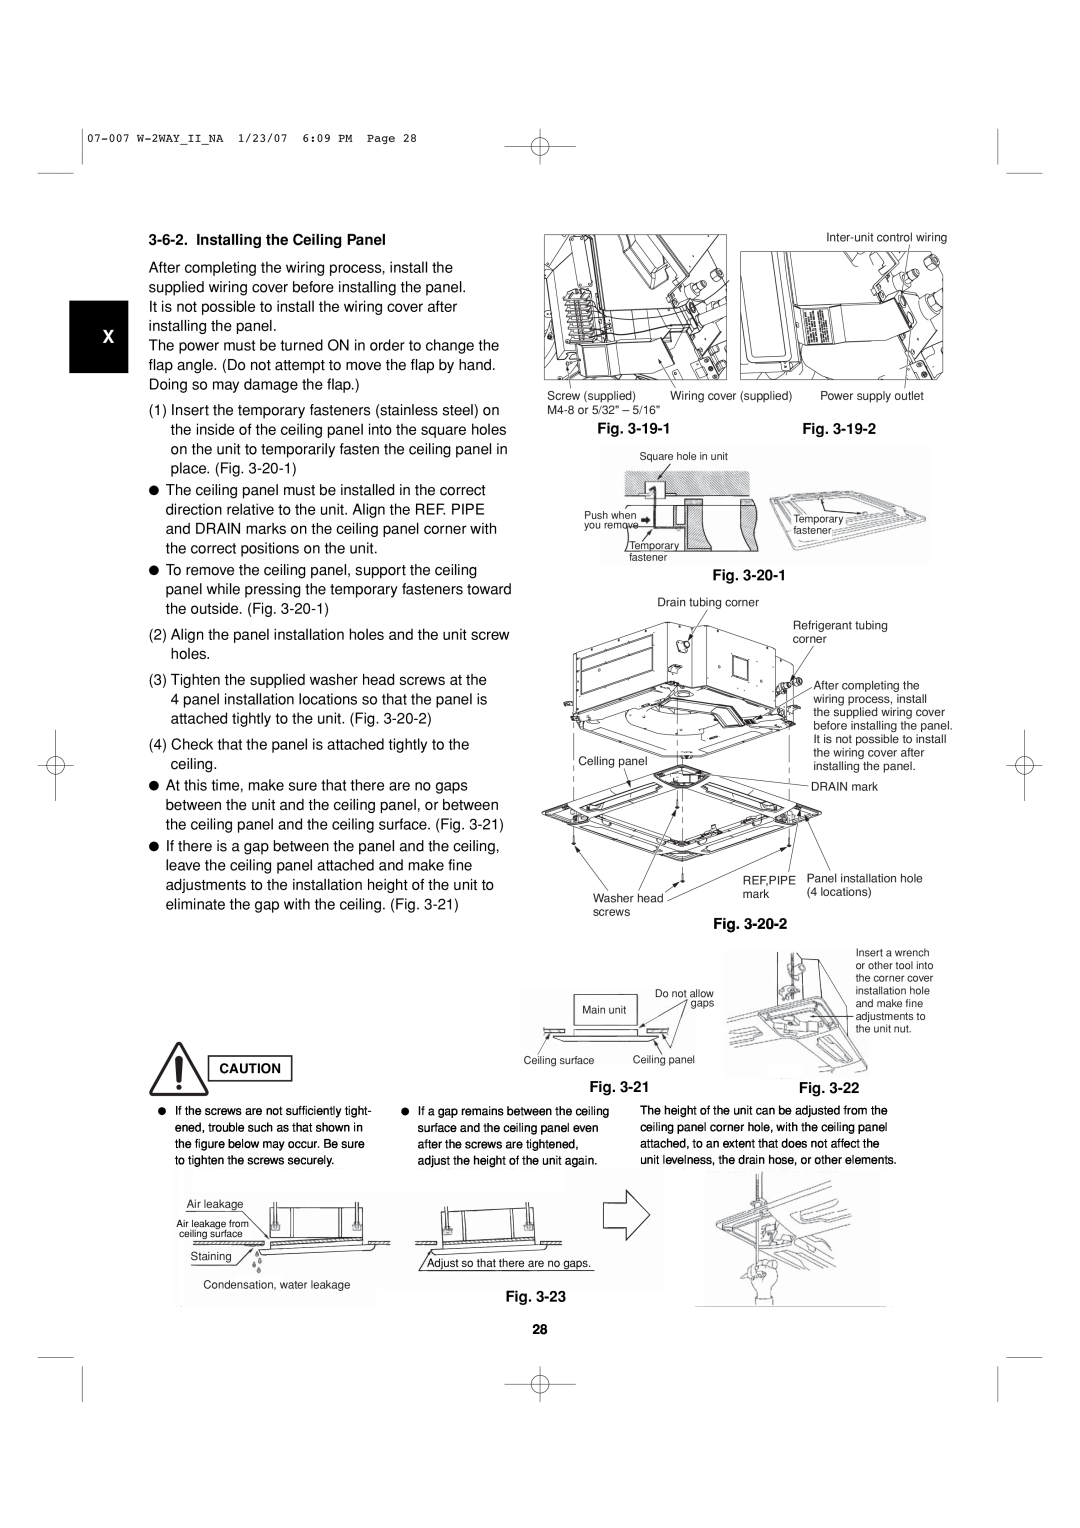 Sanyo 85464359982001 installation instructions Installing the Ceiling Panel, Fig 